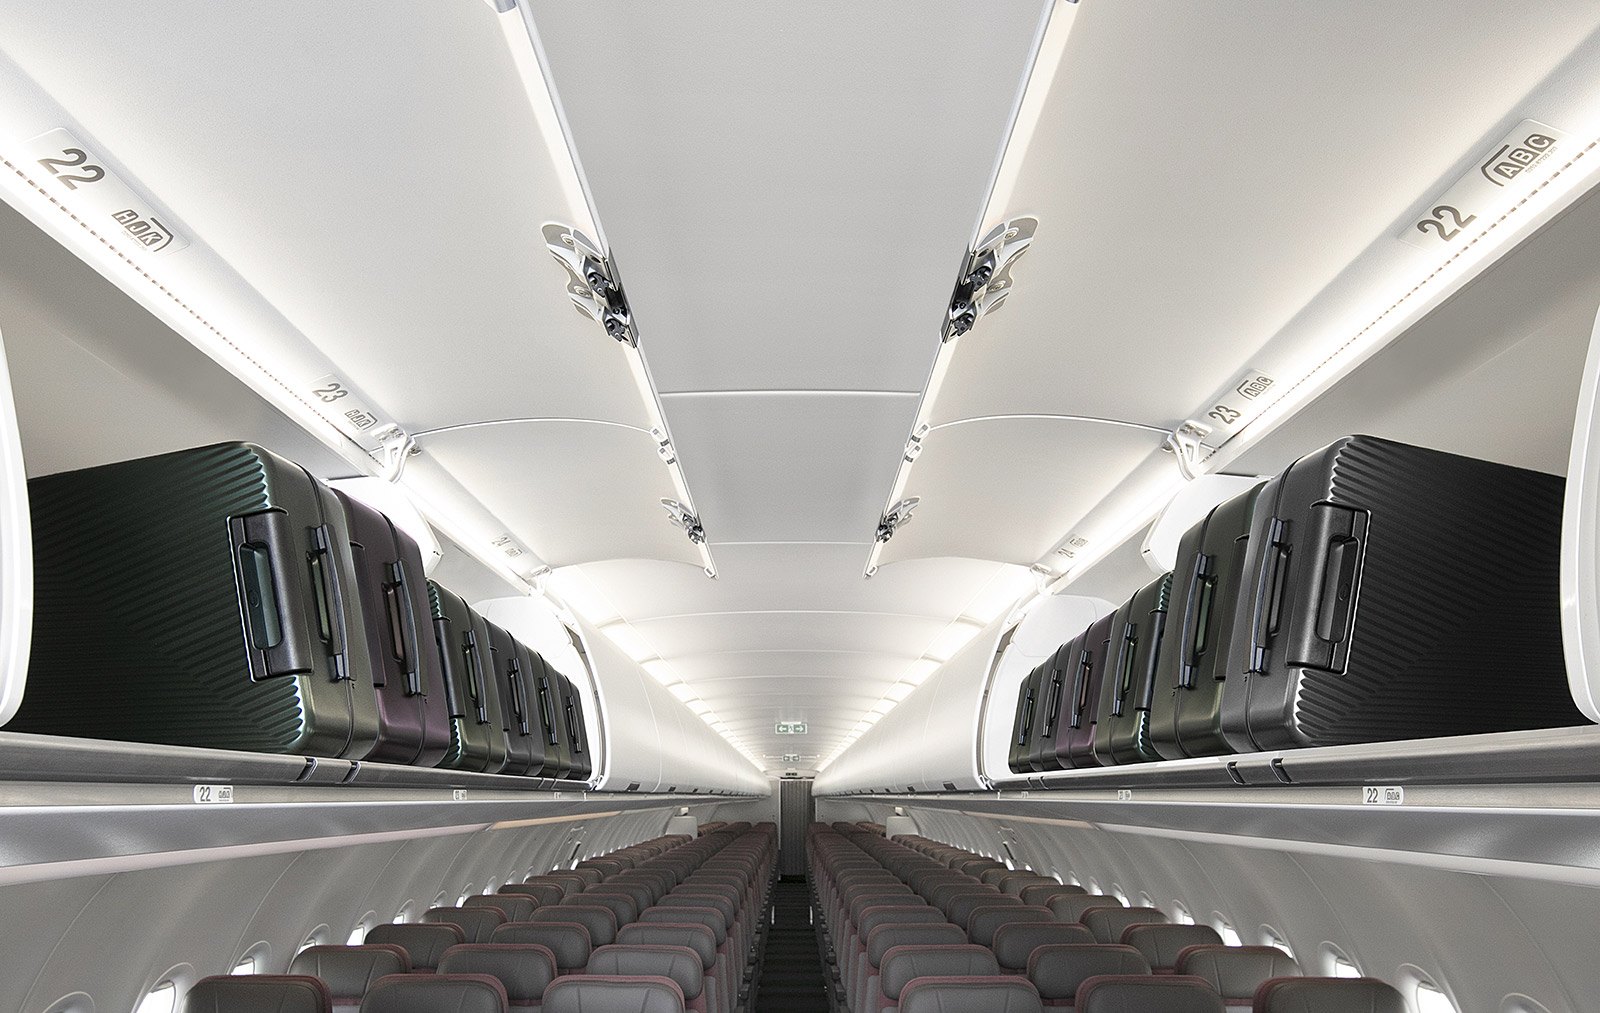 There is a sense of space across the cabin of the Airbus A321neo